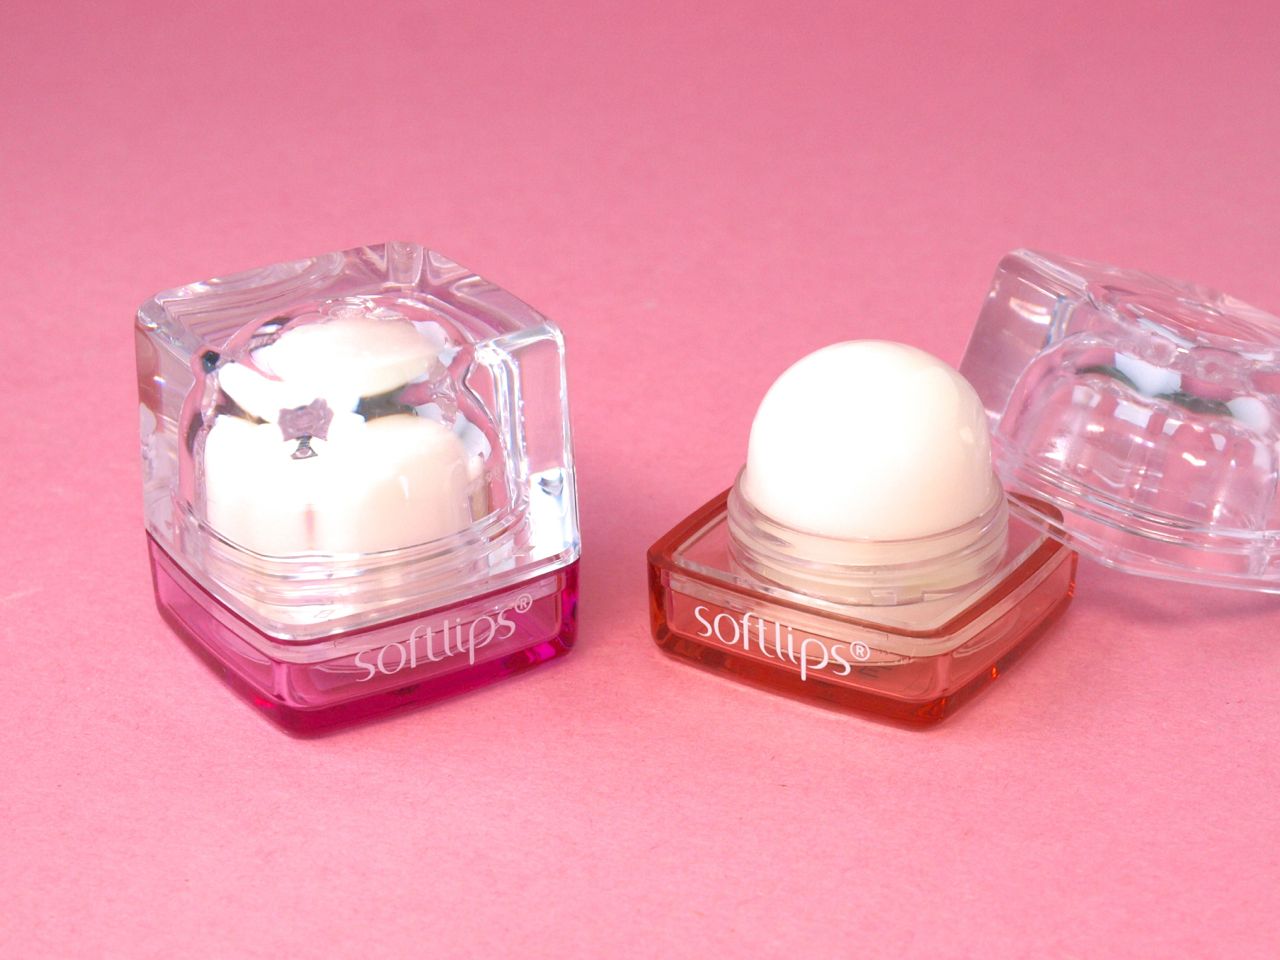 Softlips Cube in Berry Bliss & Vanilla Bean: Review